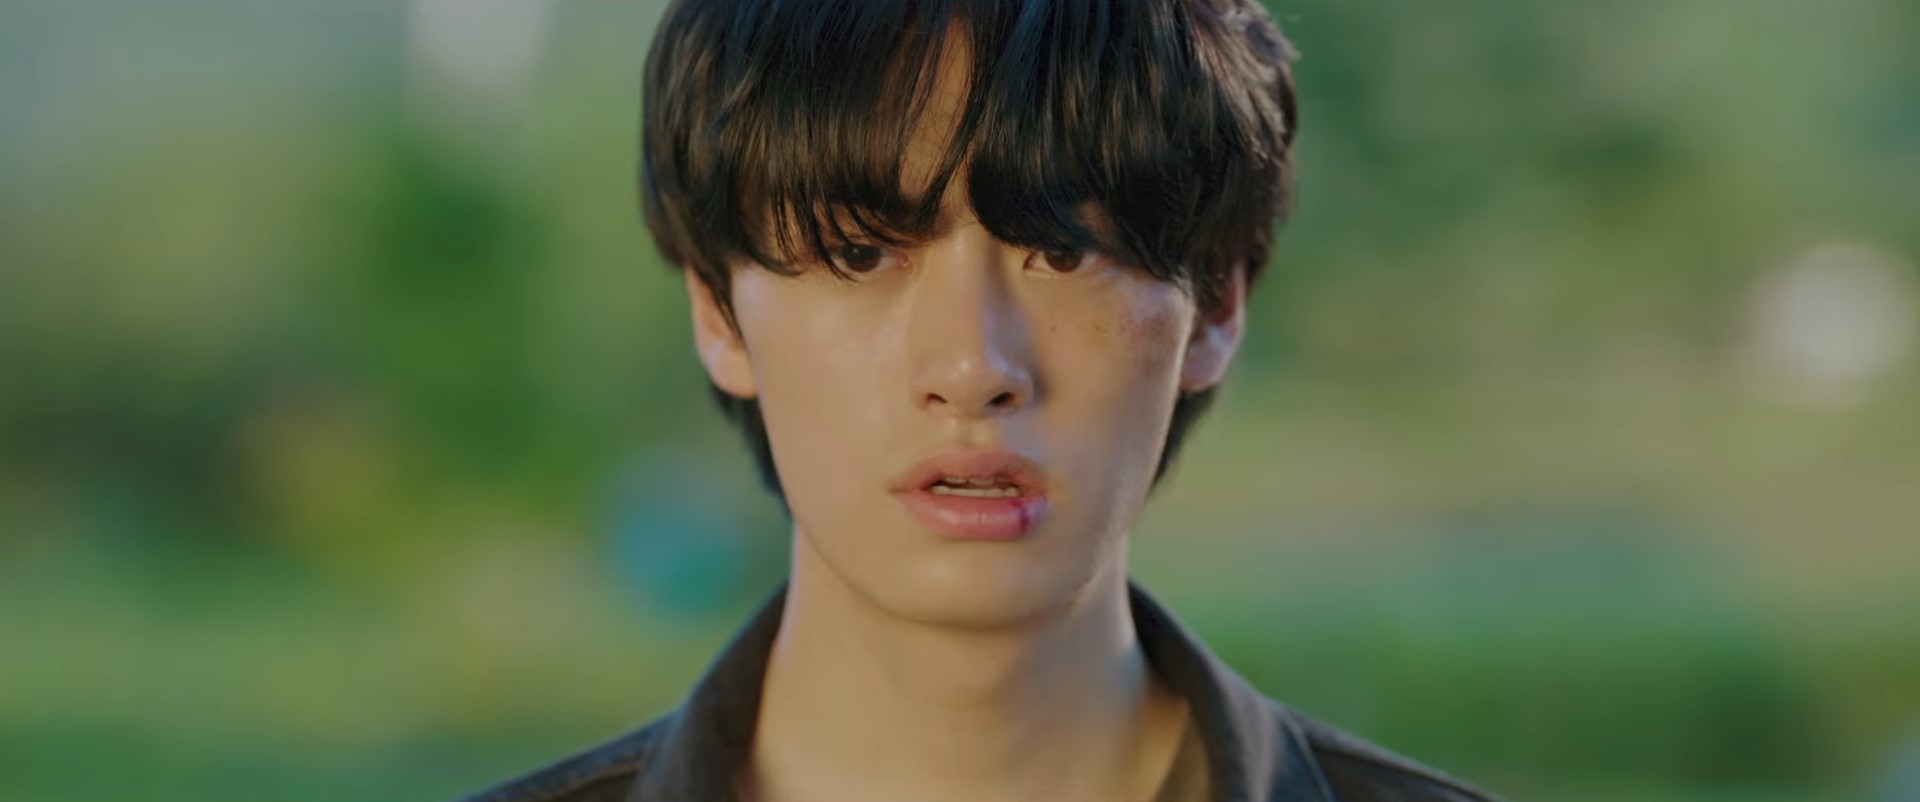 My Perfect Stranger Episode 8 Recap/Review: Truth and Lies Blur Into Each Other